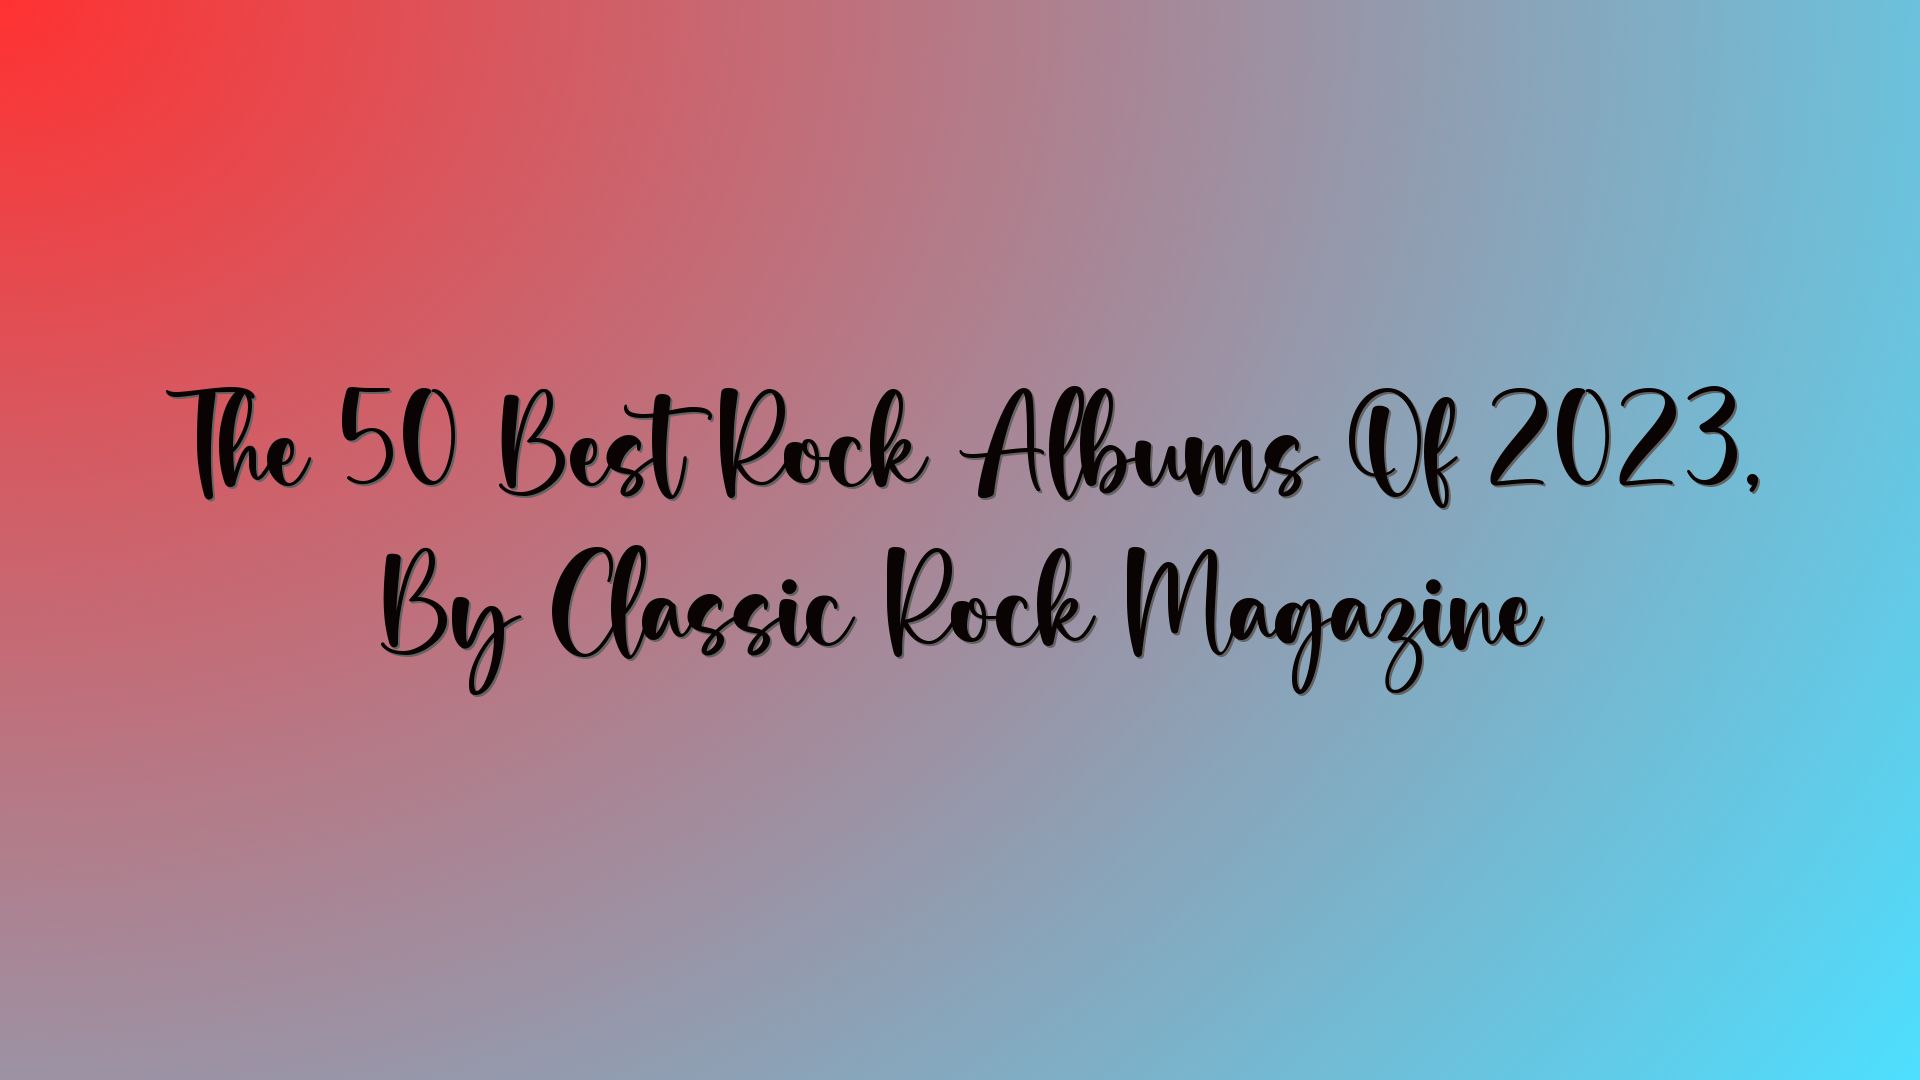 The 50 Best Rock Albums Of 2023, By Classic Rock Magazine